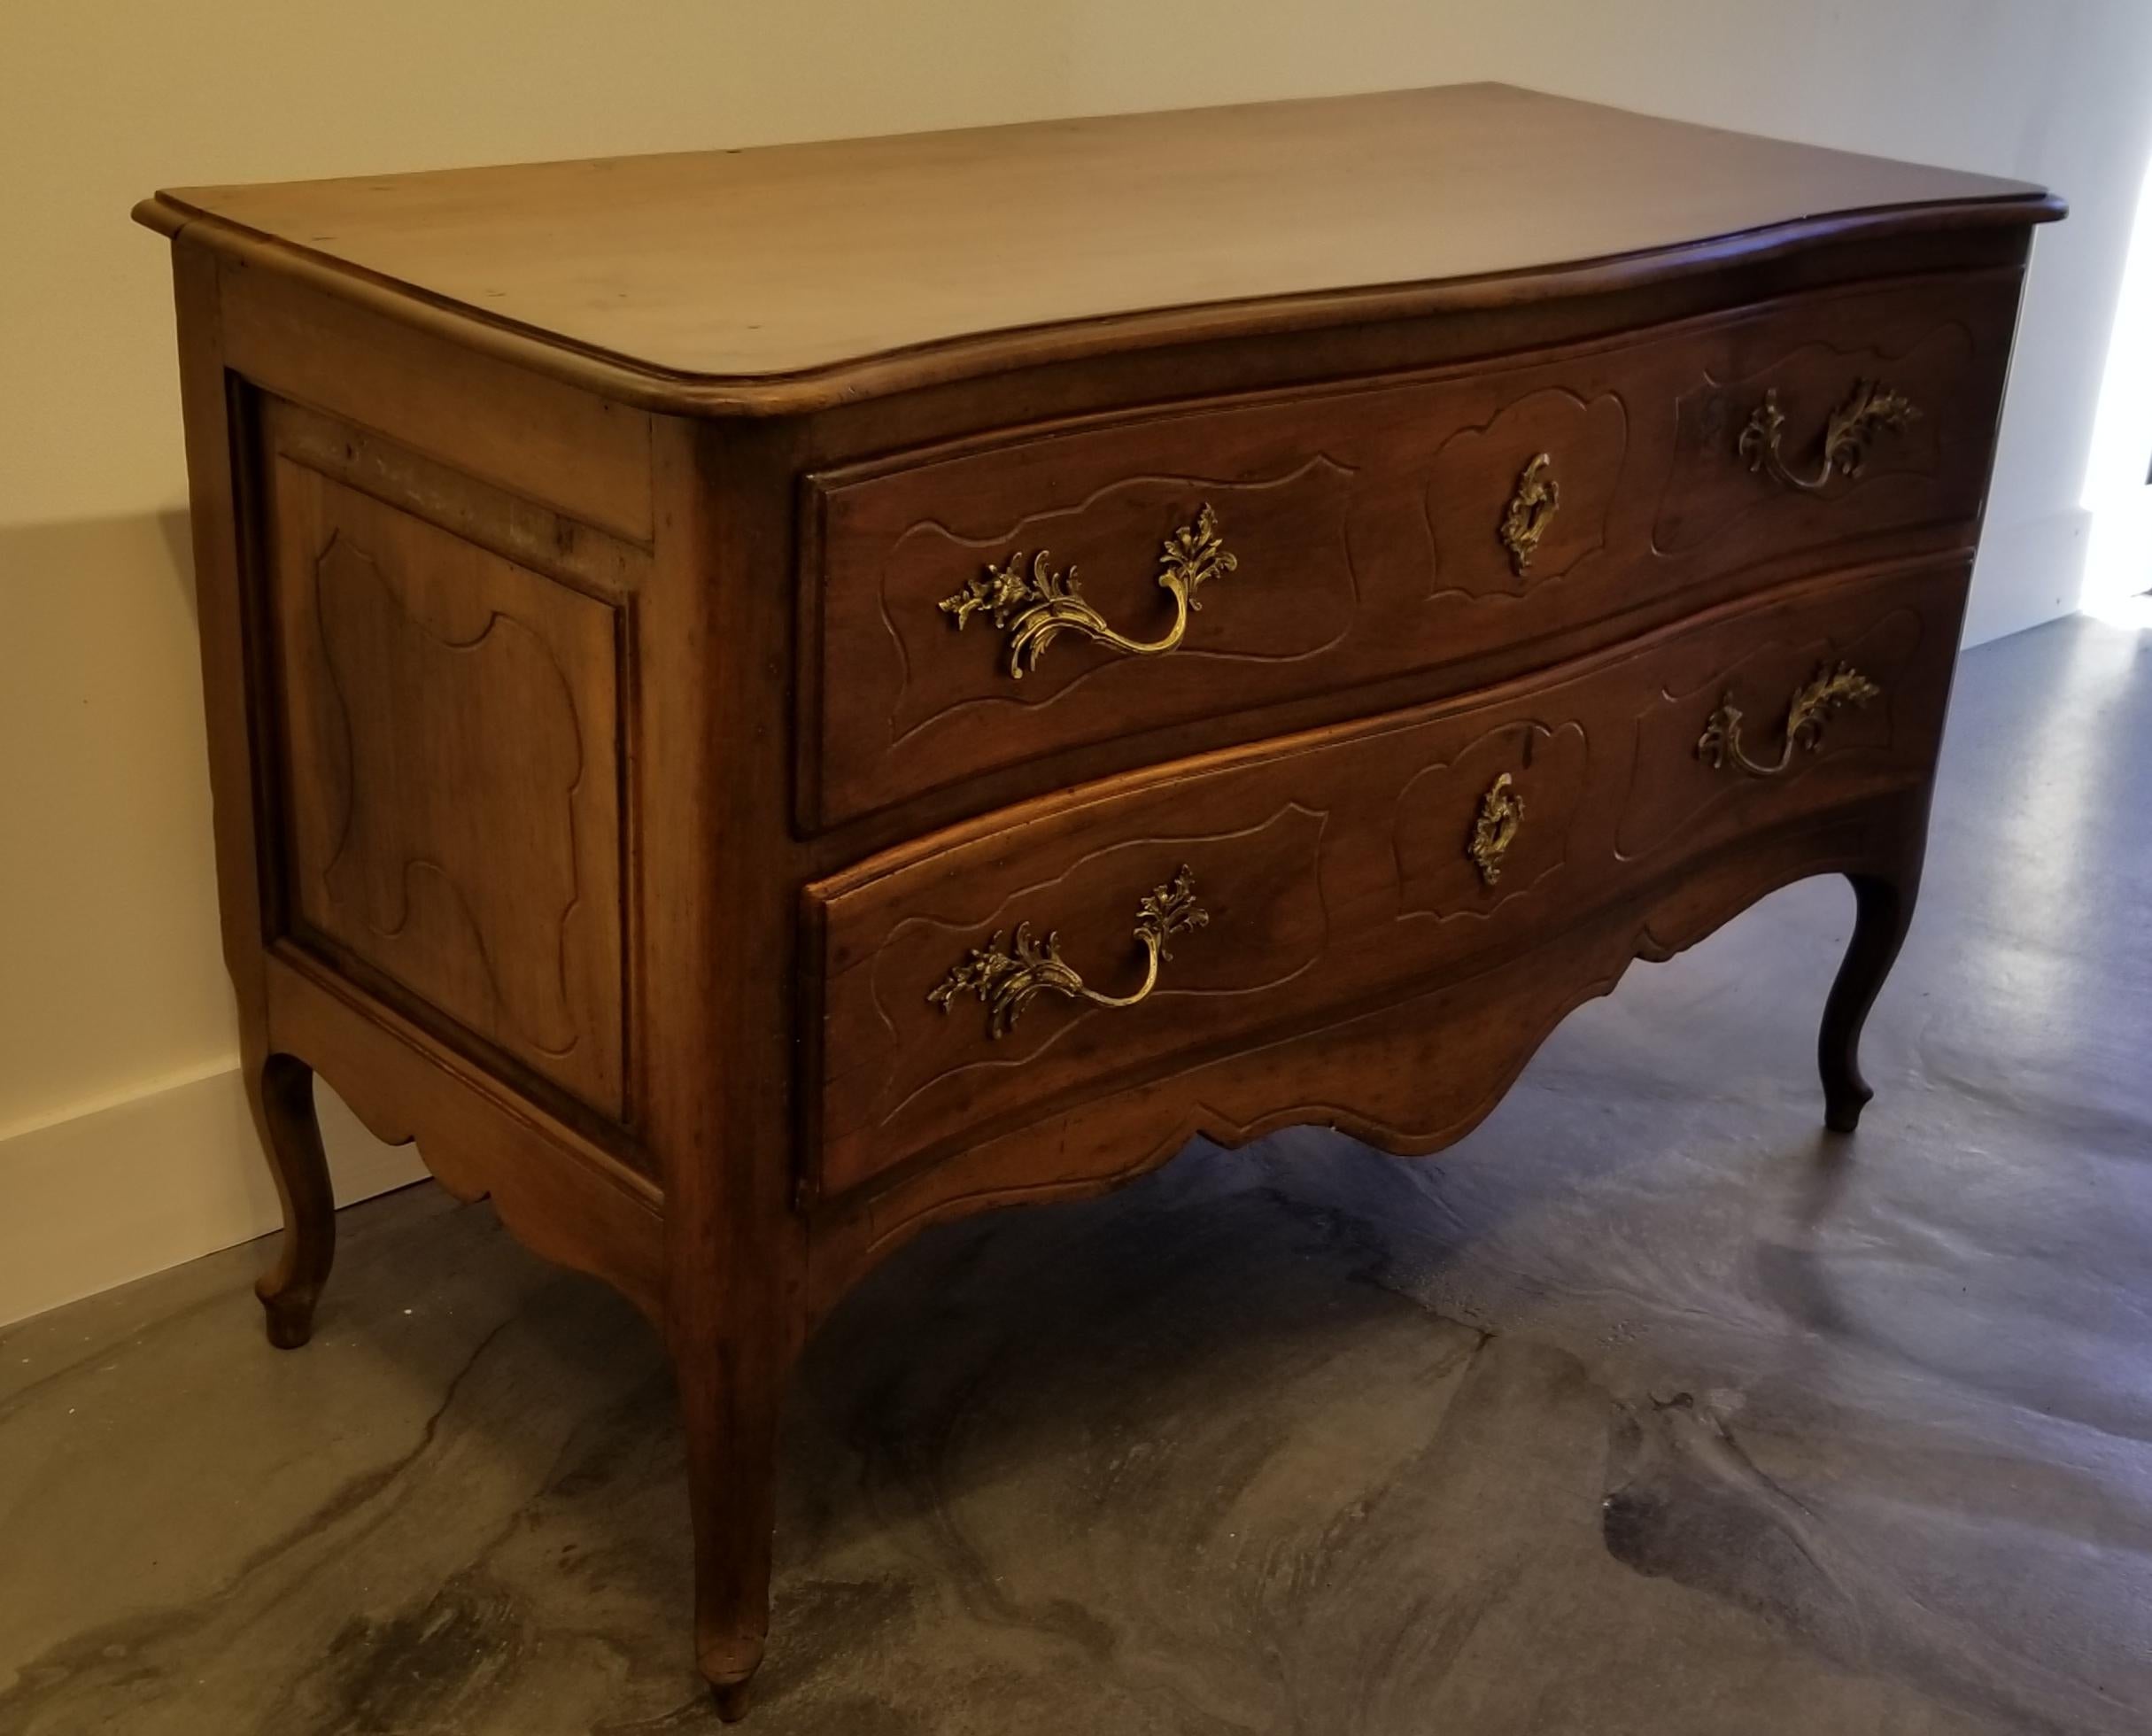 18th Century Italian Rococo Walnut and Olivewood Commode In Good Condition For Sale In Fulton, CA